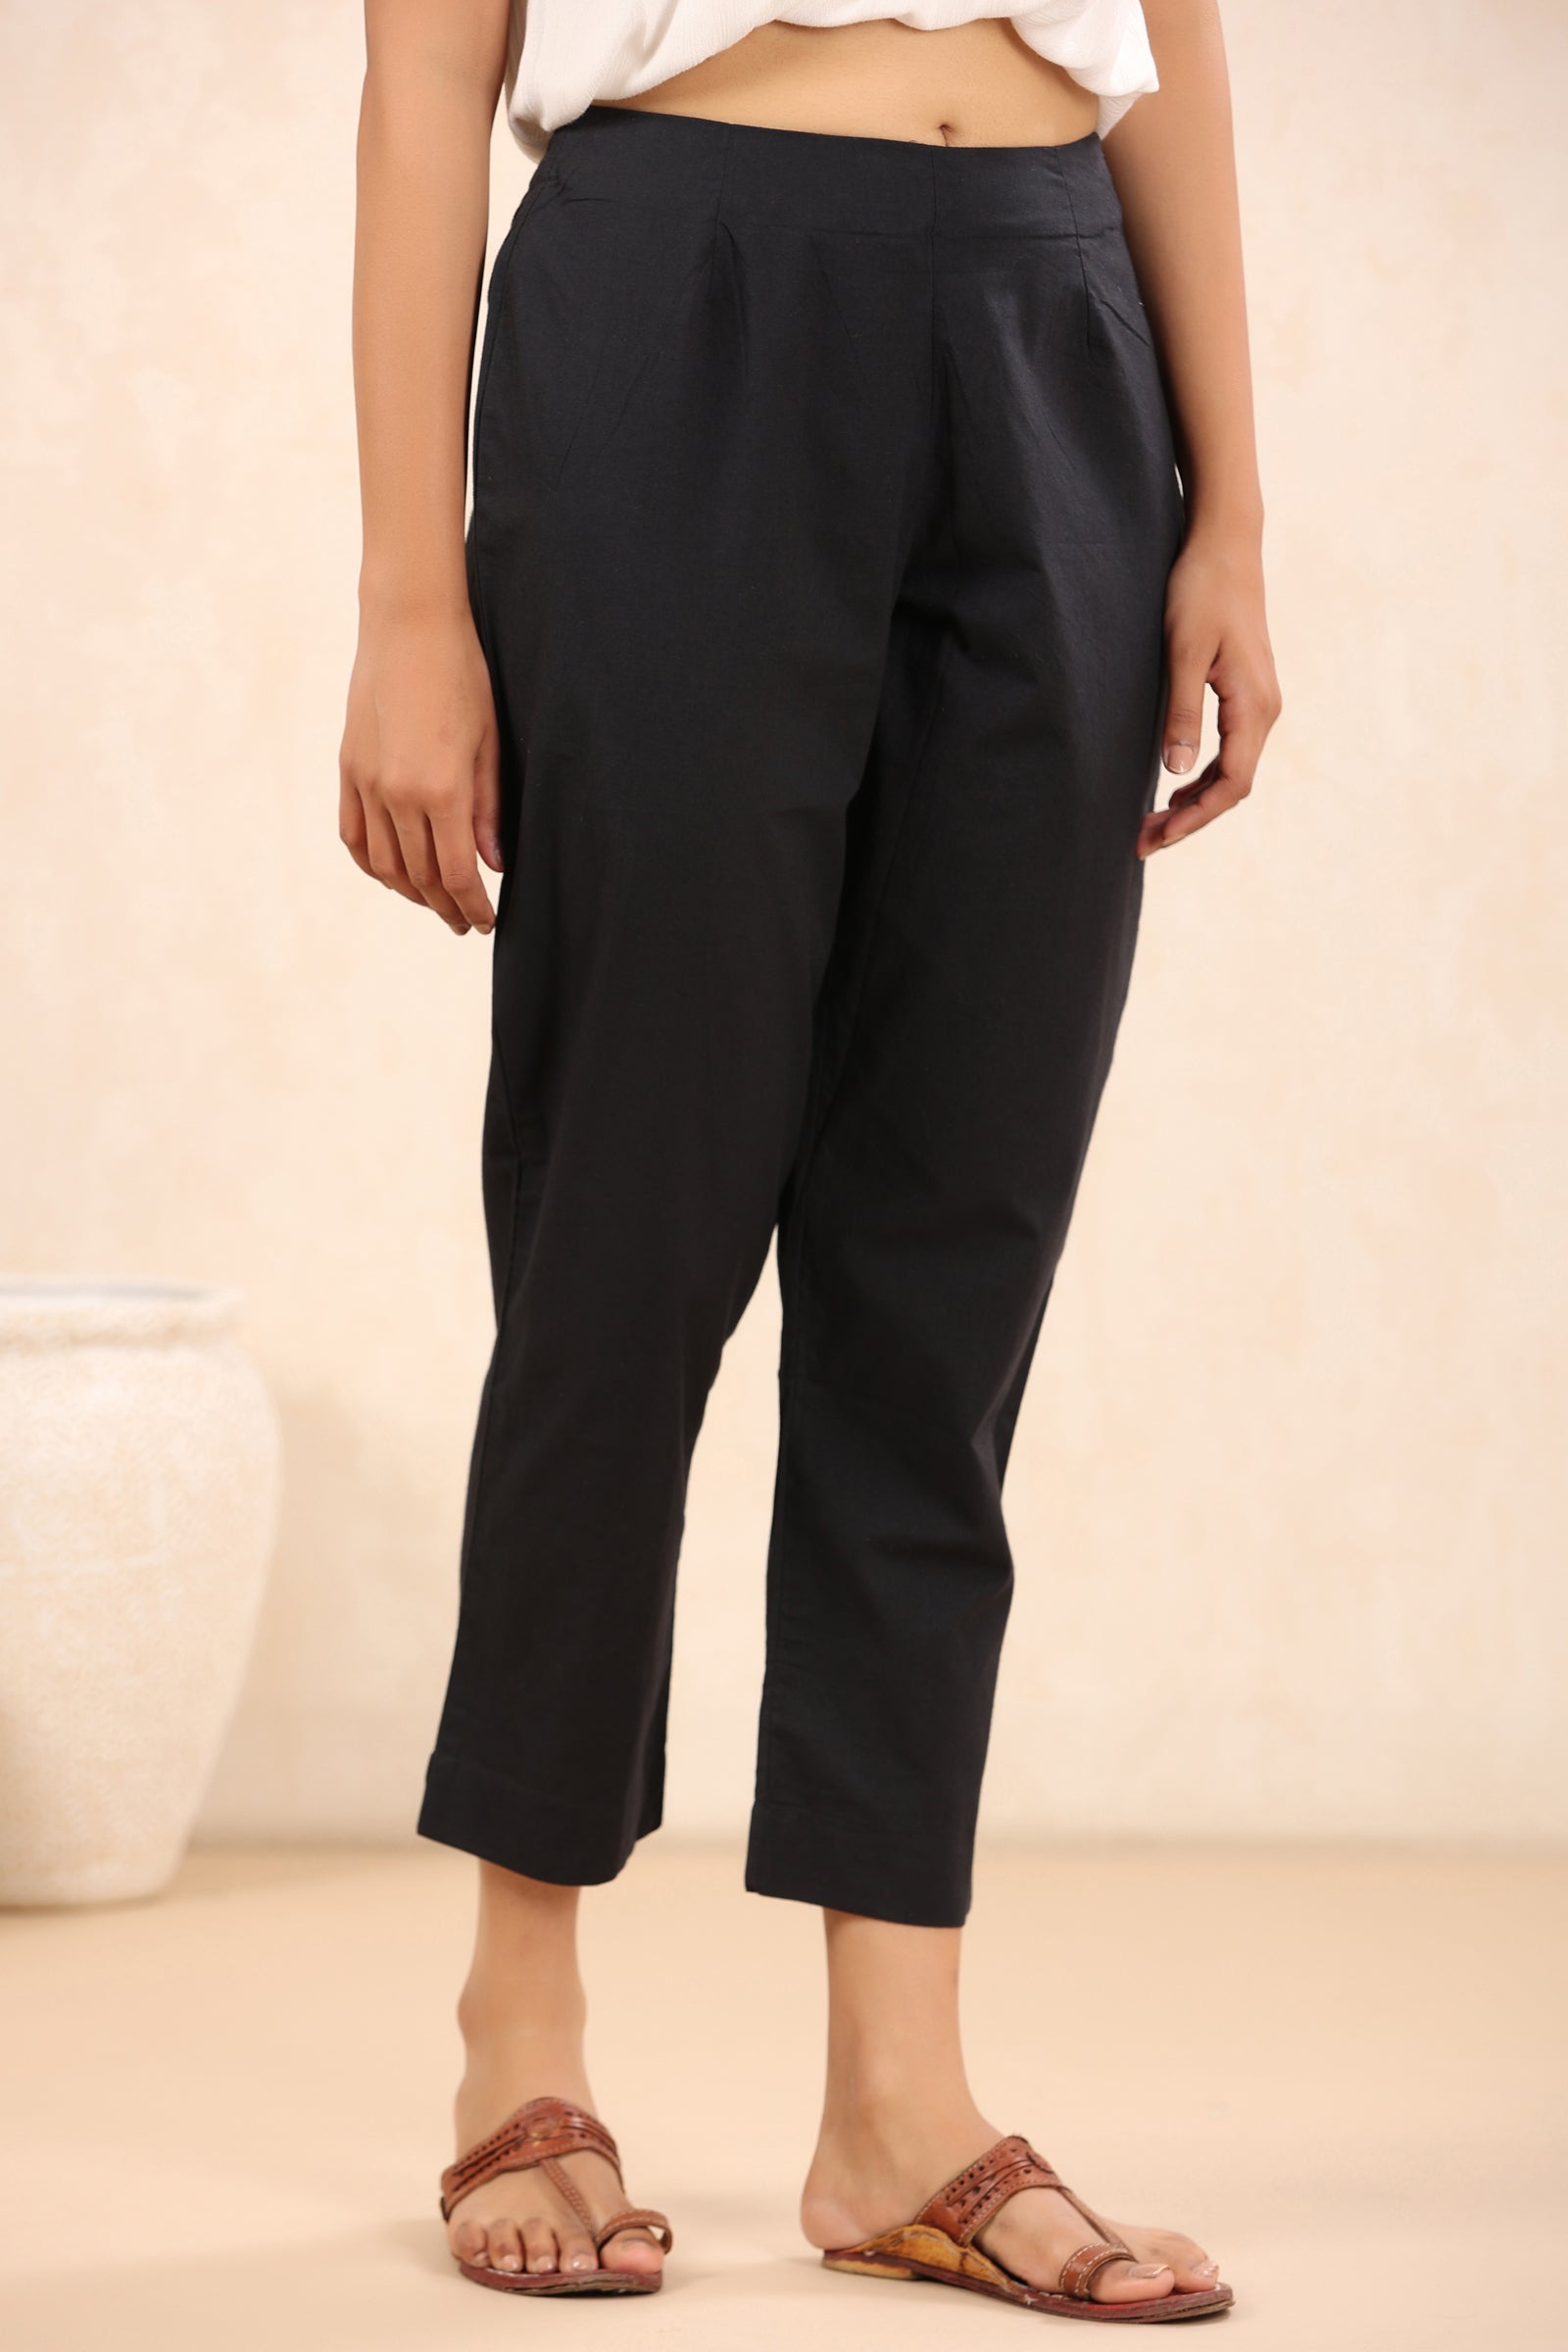 Mehrab Solid Black Relaxed Fit Cotton Pants - shahenazindia